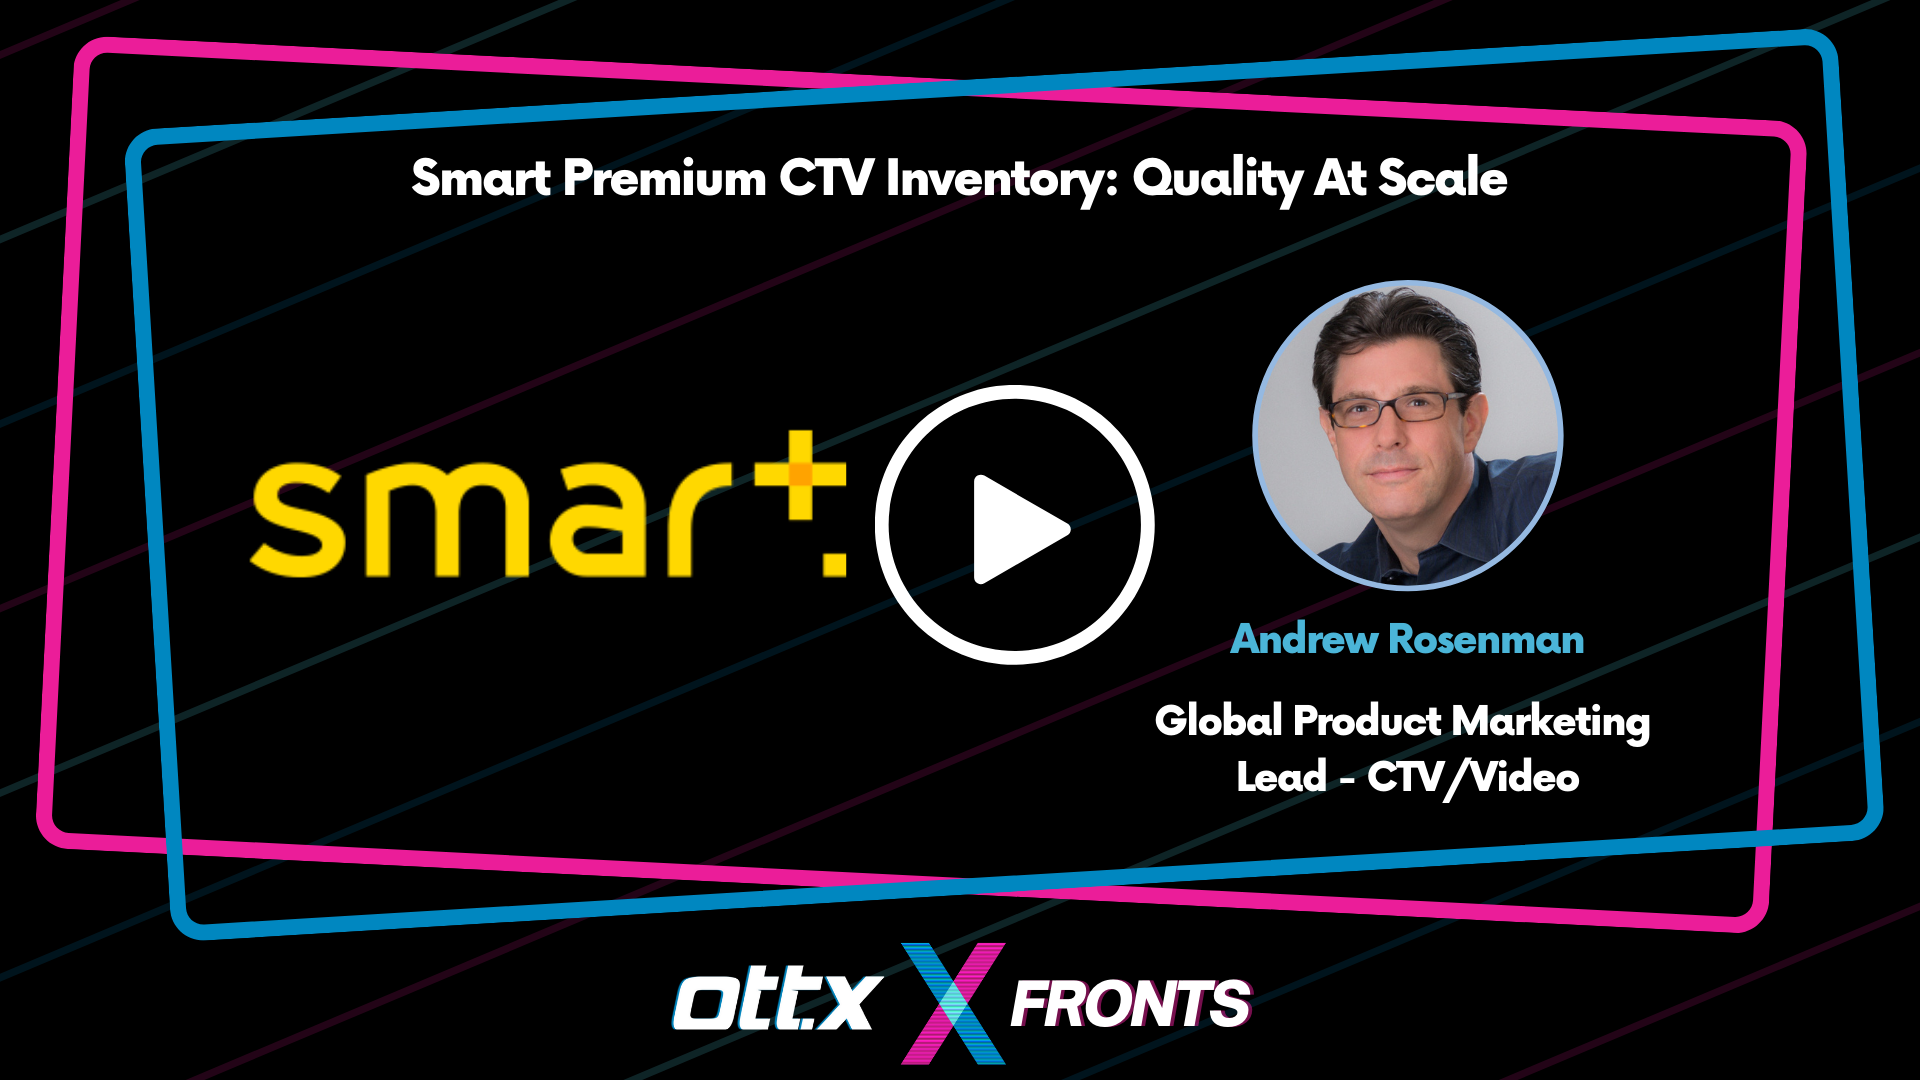 XFRONTS DAY 1 SMART PREMIUM CTV INVENTORY QUALITY AT SCALE